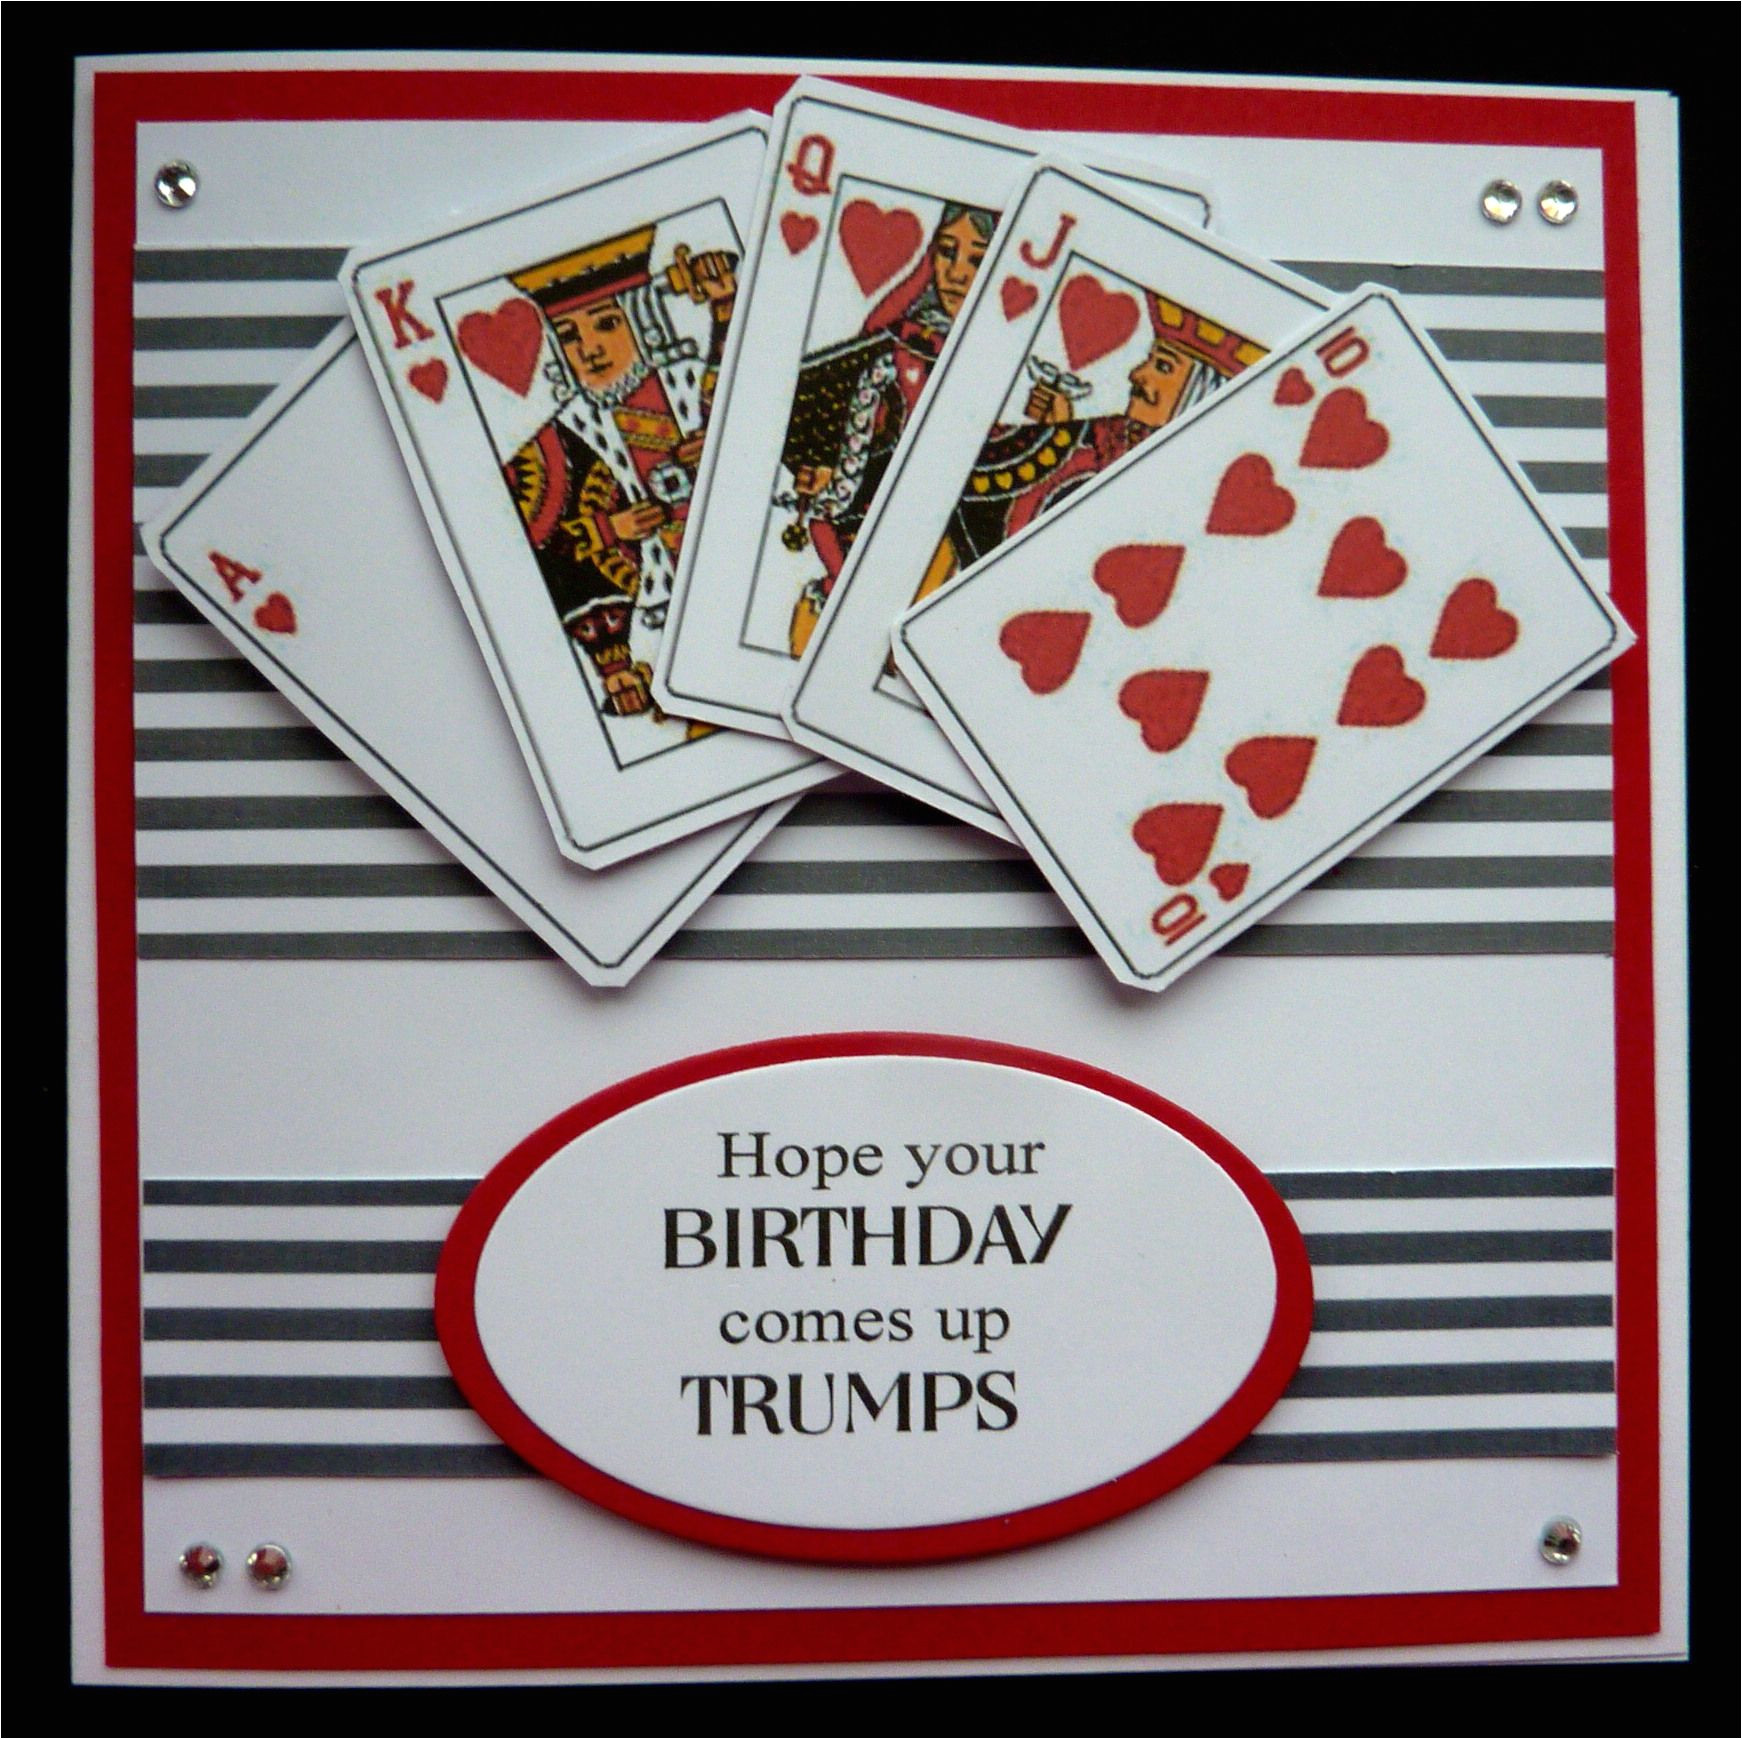 Happy Birthday Wishes Card with Name S459 Hand Made Birthday Card Using Playing Card Images